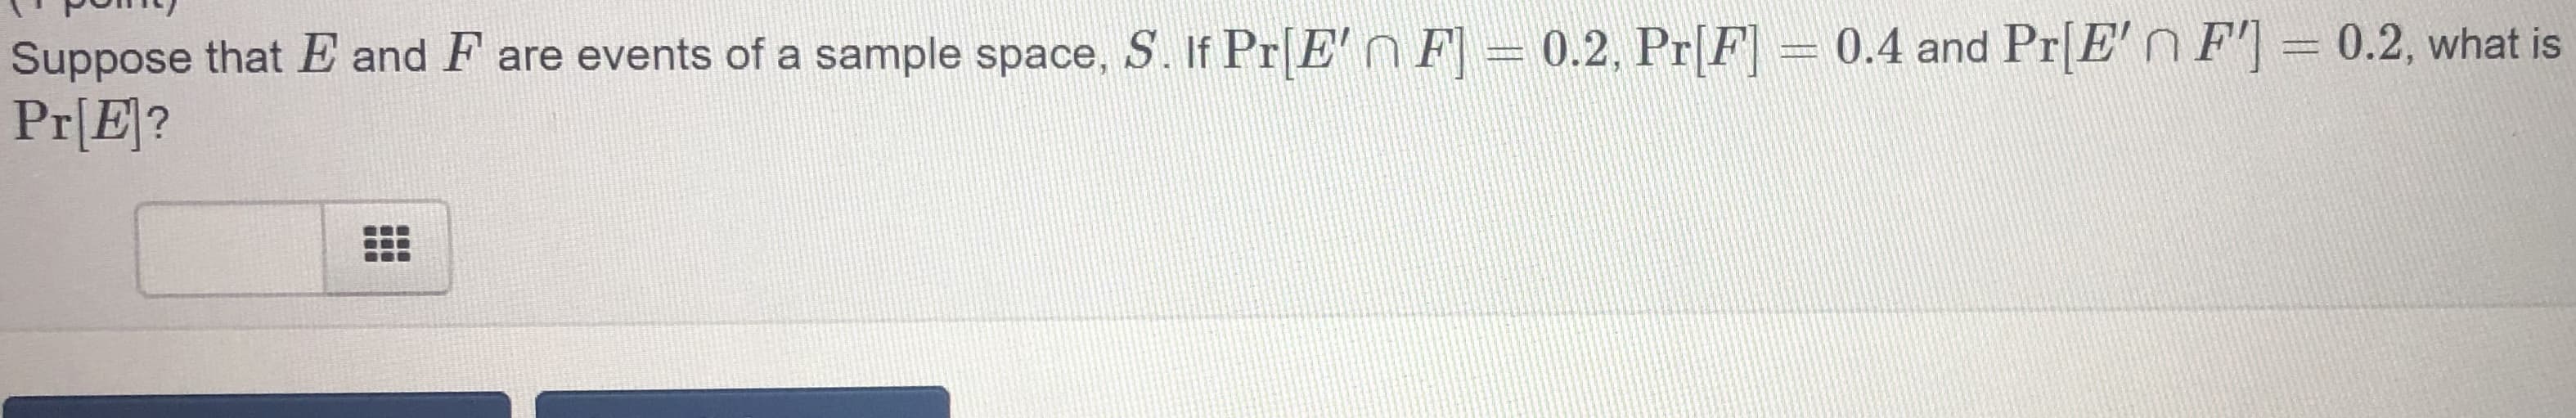 Suppose that E and F are events of a sample space, S. If Pr[E' nF = 0.2, Pr[F] = 0.4 and Pr[E' n F'] = 0.2, what is
Pr[E?
